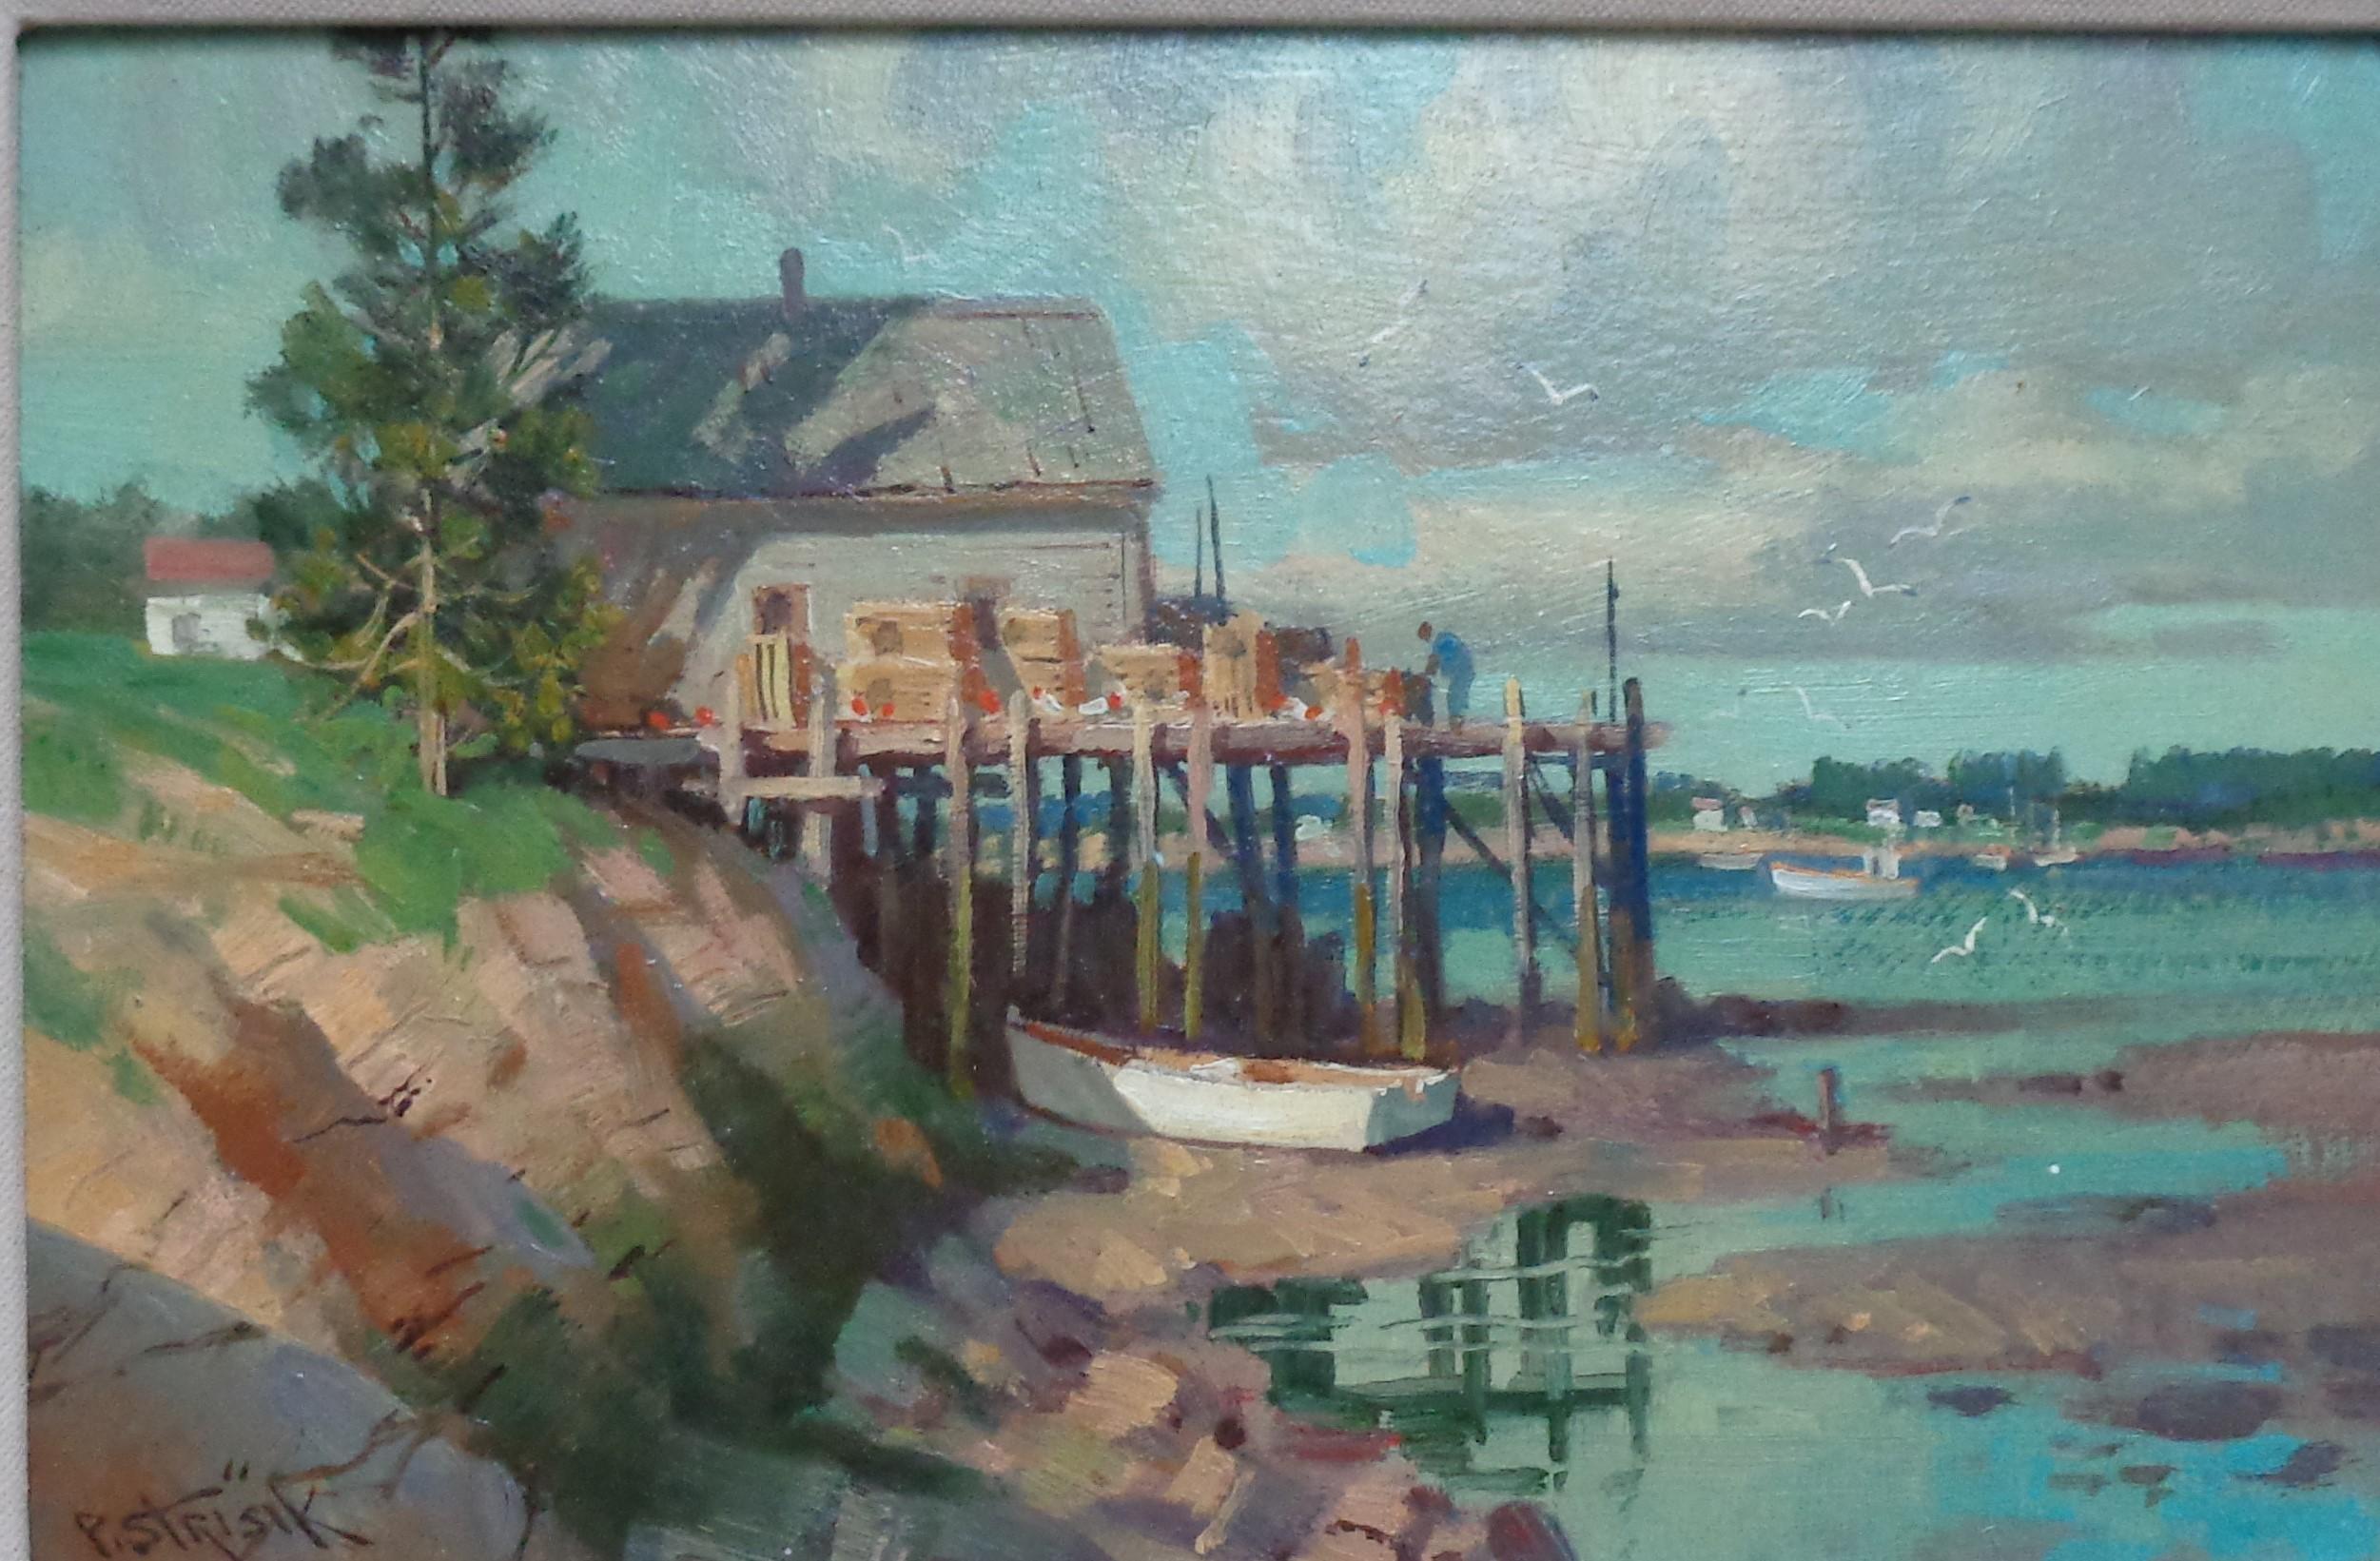   Paul Strisik Marine Painting American Impressionist National Academy Rockport For Sale 1